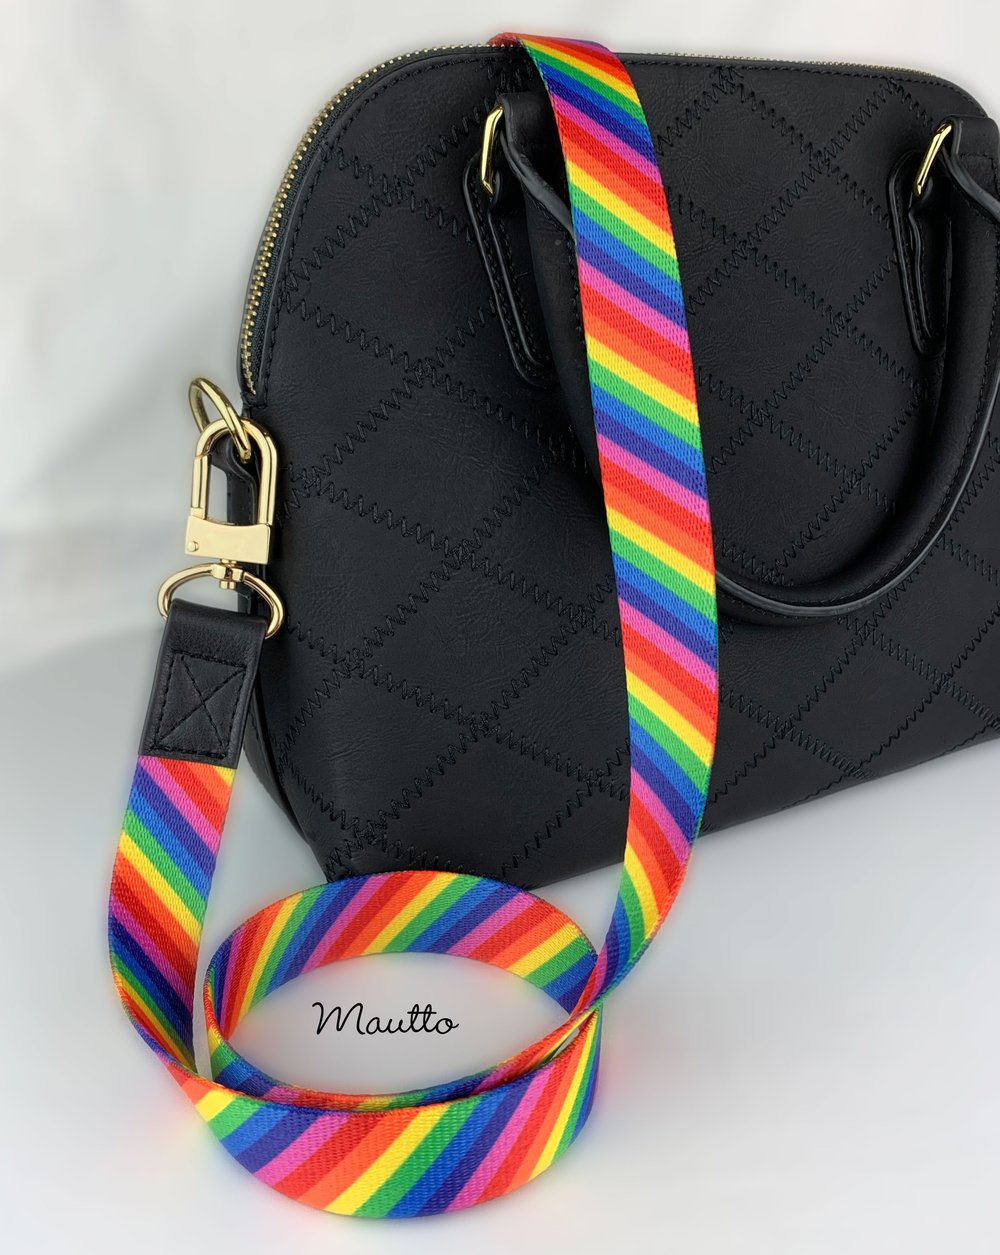 Image of Rainbow Handbag/Purse Strap - 1" Wide Classic Fit - Black Leather Accents, Choose #16XLG Clip Finish